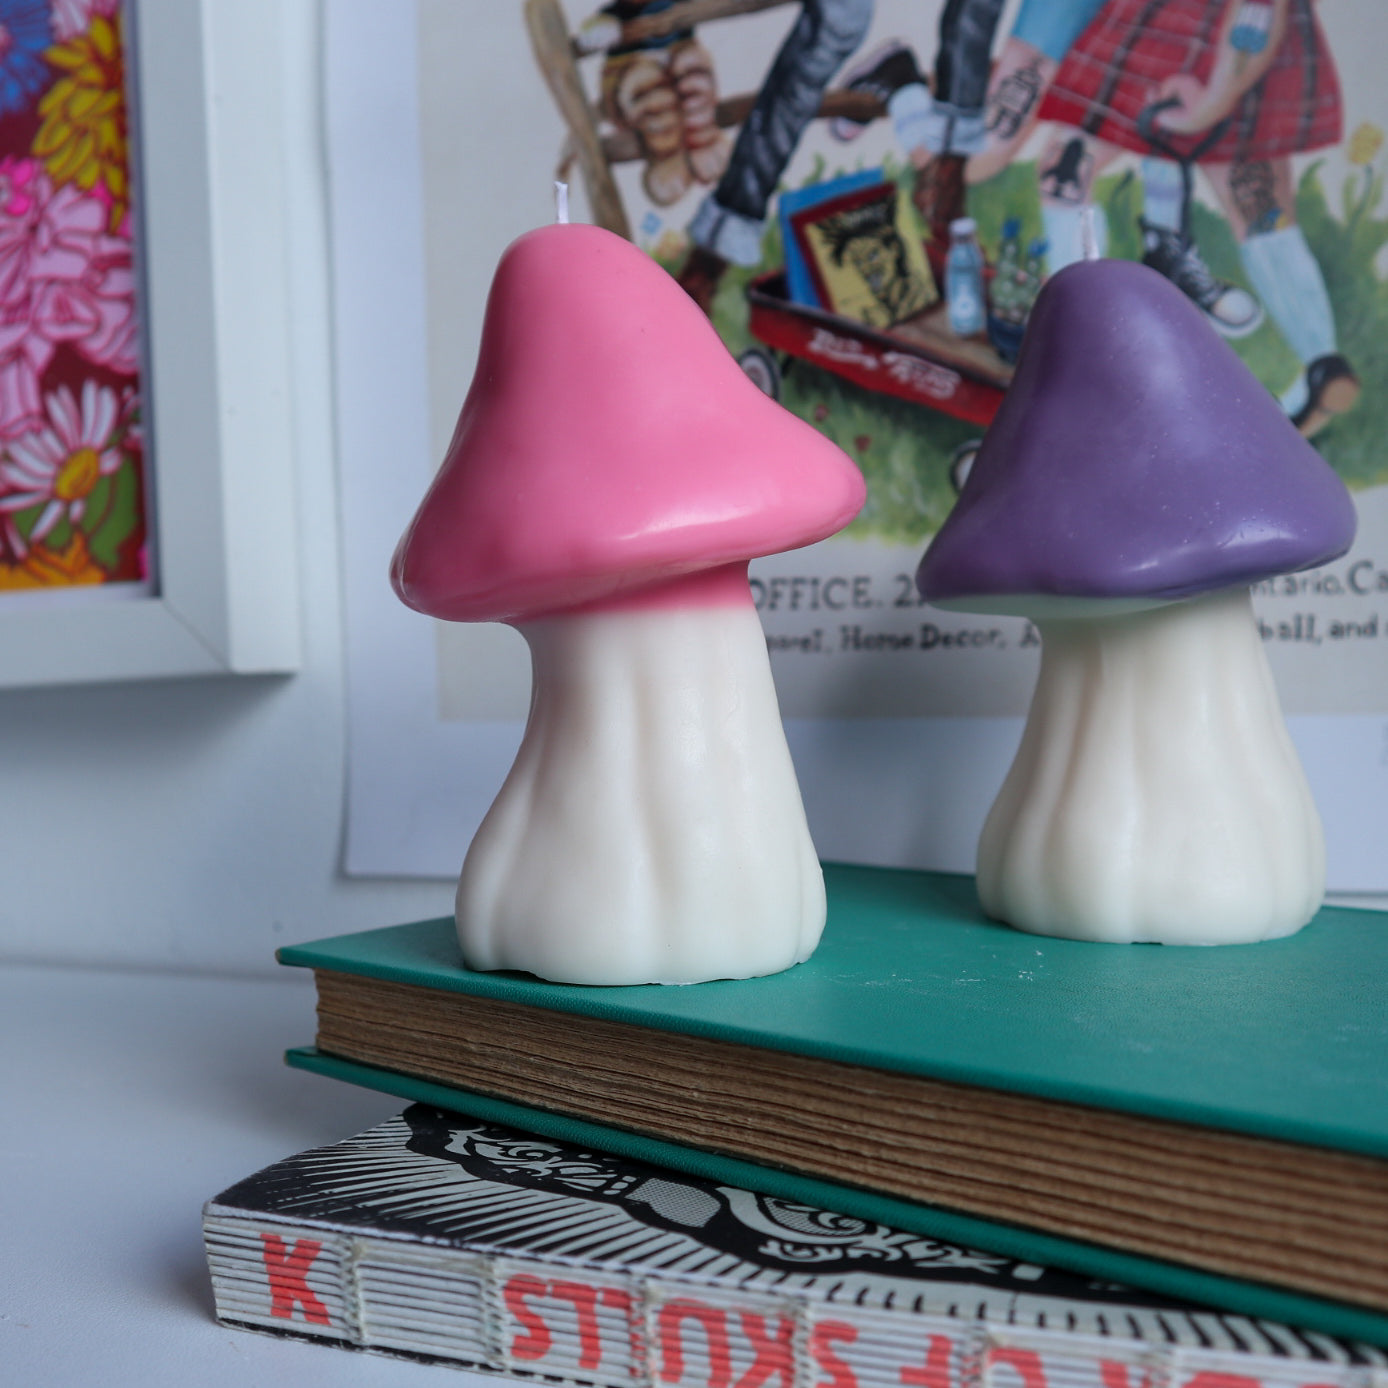 Psychedelic Mushroom Candle - Candles - Home & Office - Products